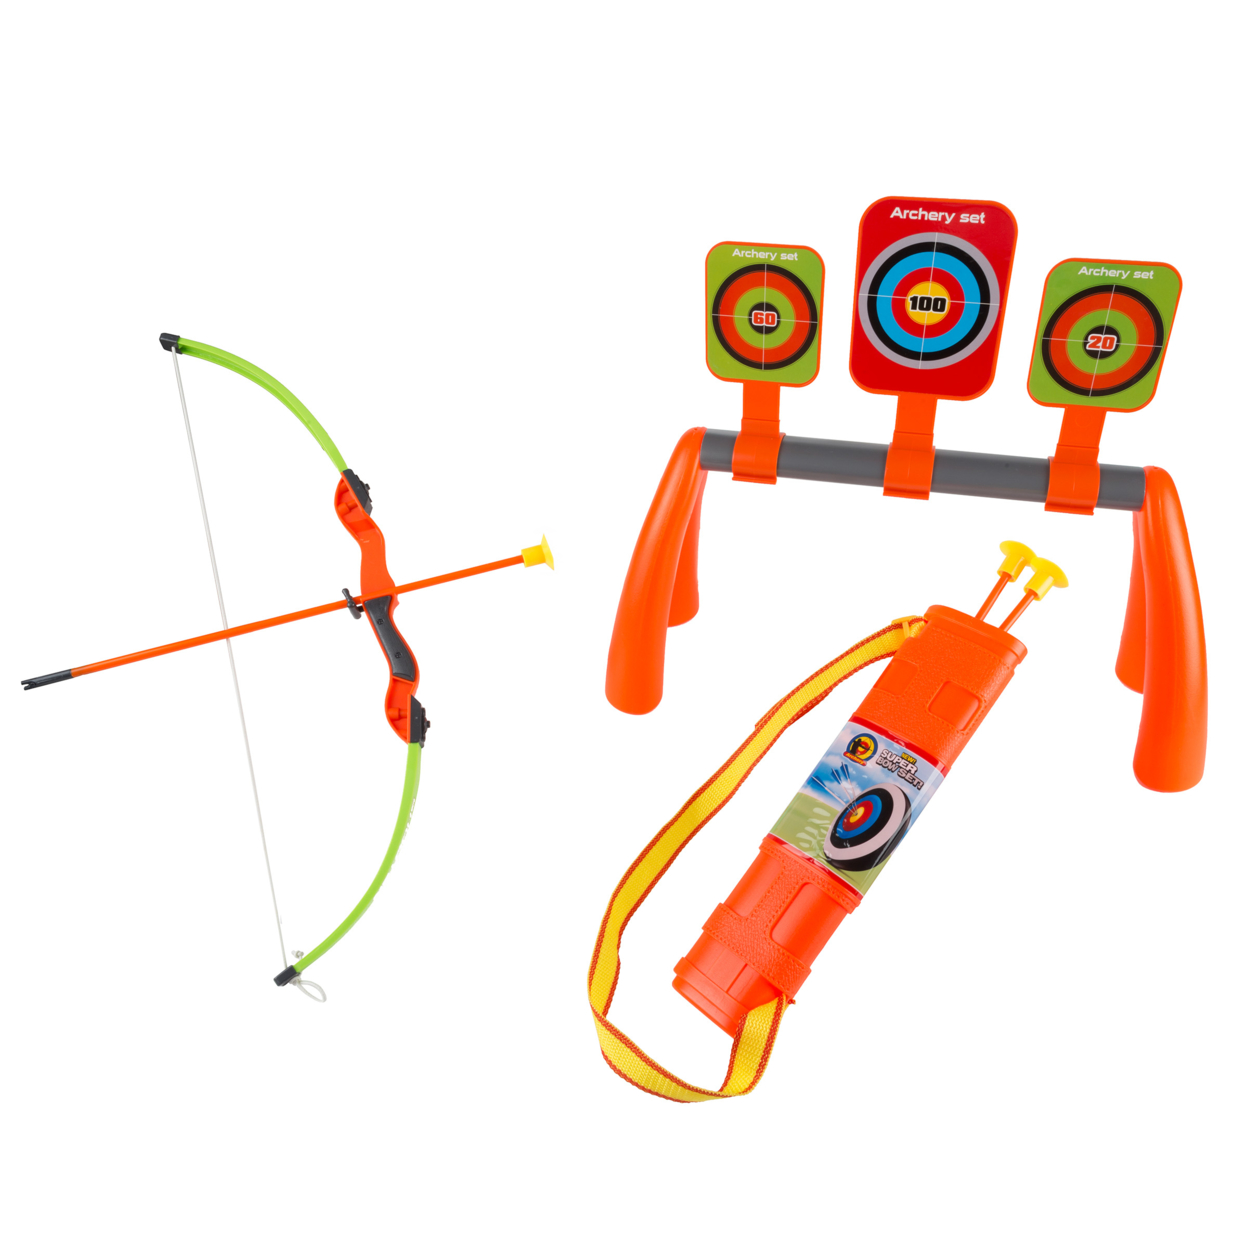 Kids Bow And Arrow Toy Archery 3 Arrows Quiver Target Aim Boards Indoor Outdoor